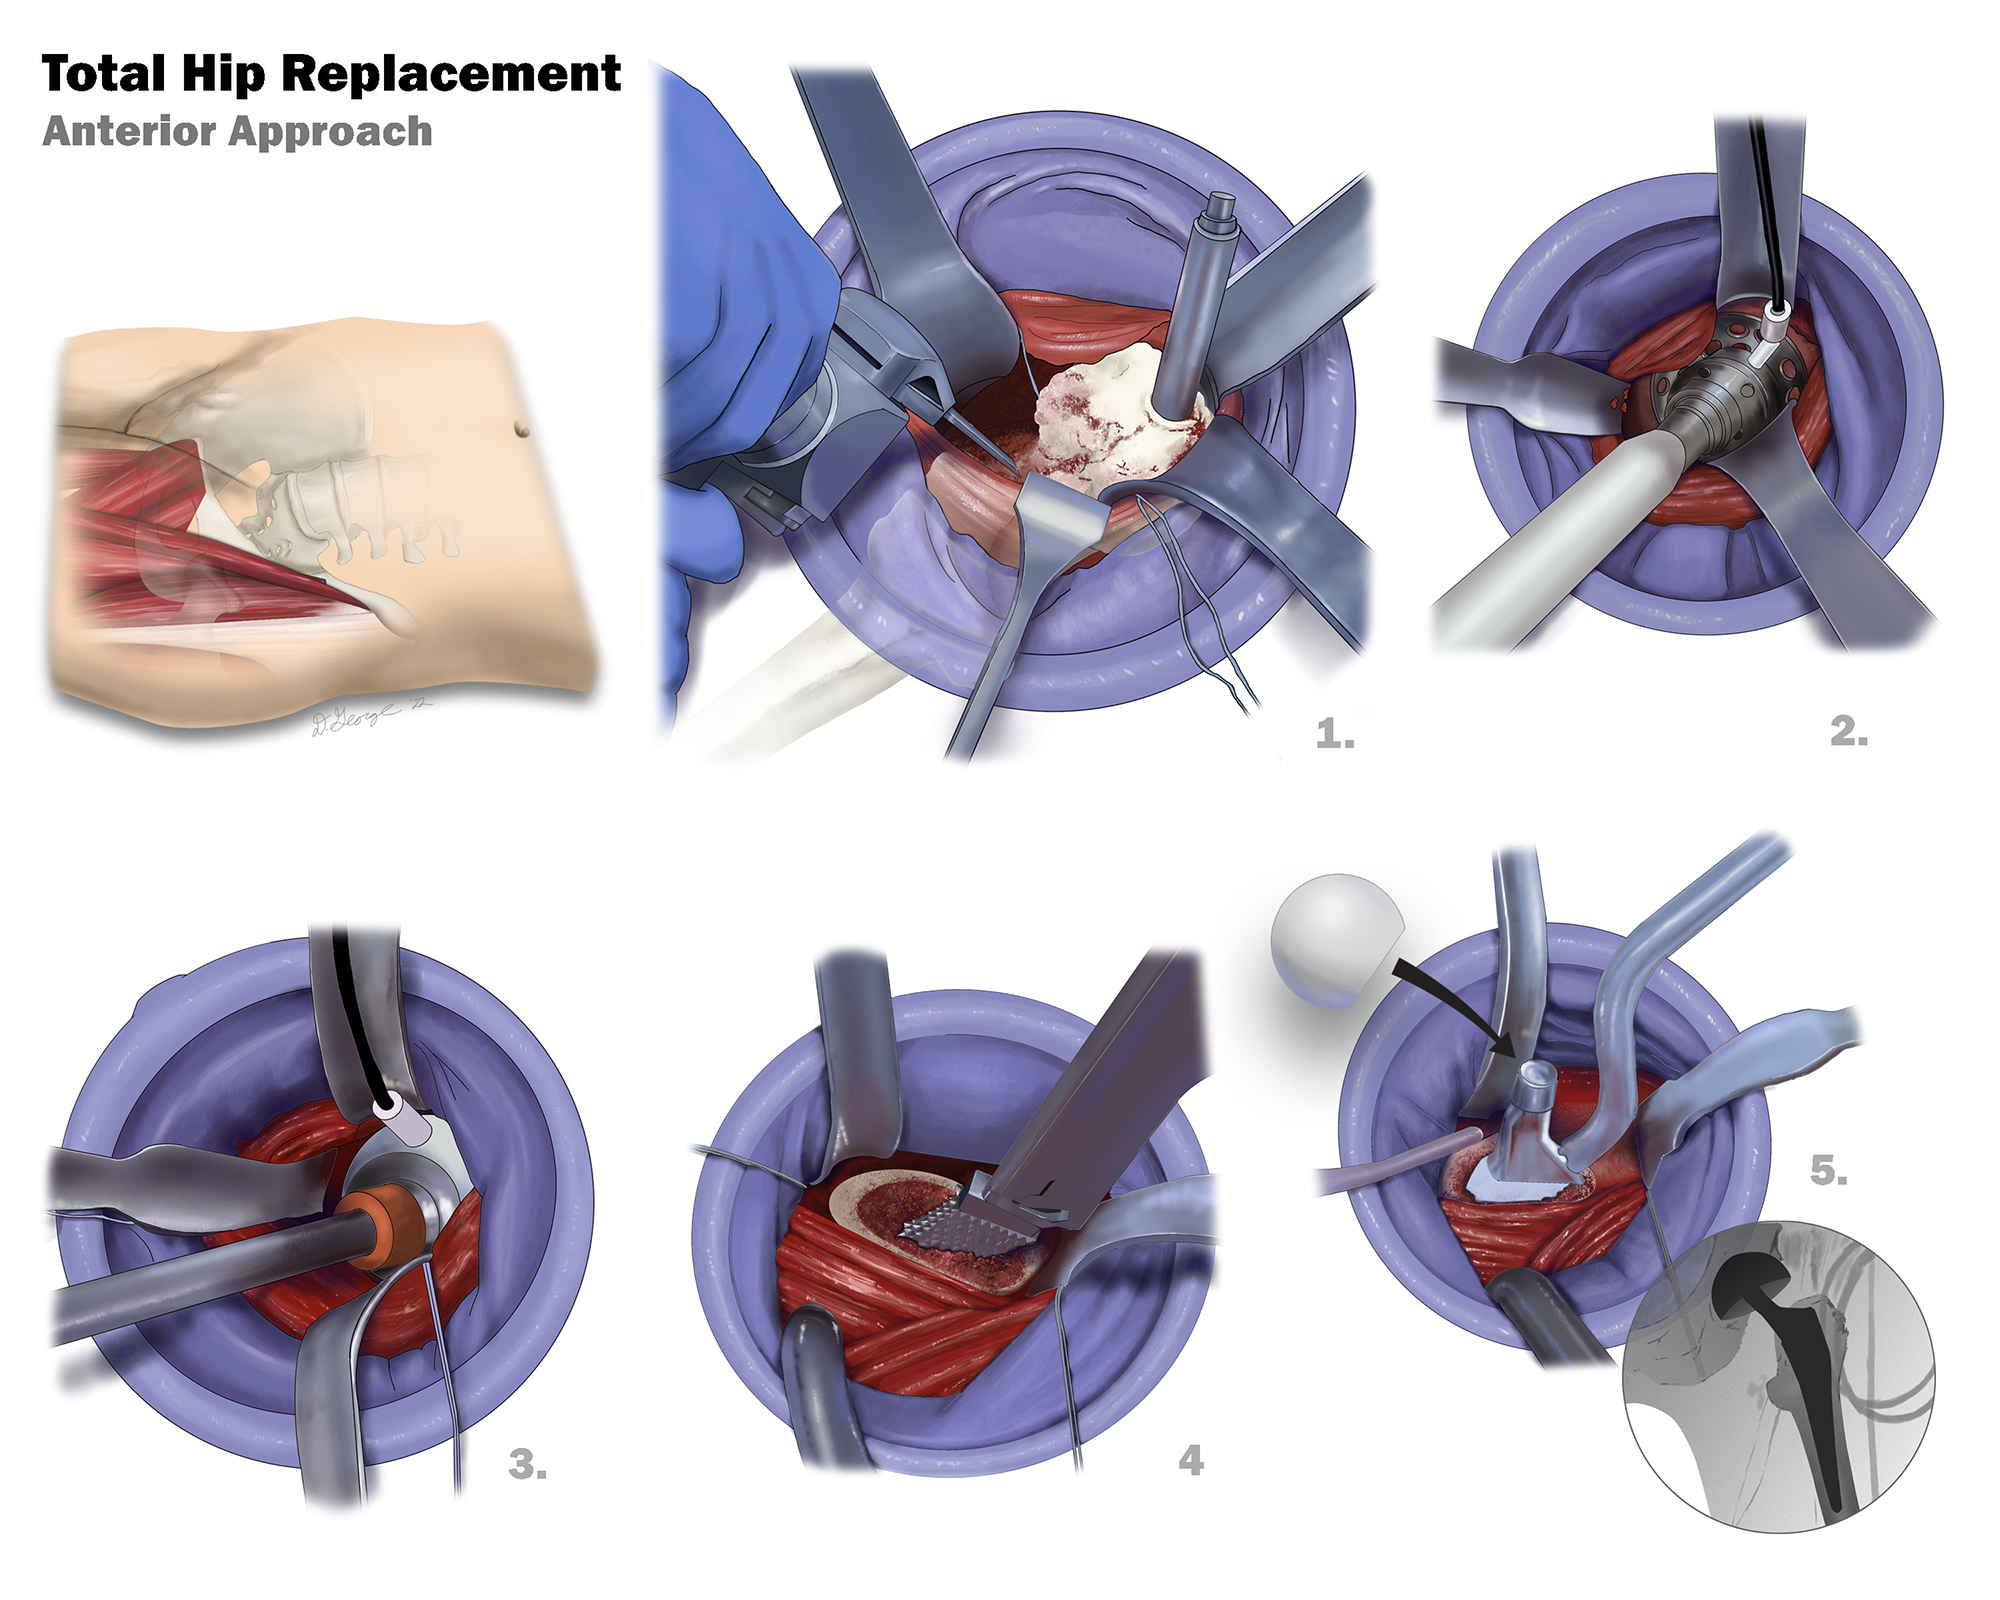 An illustration of a hip replacement.